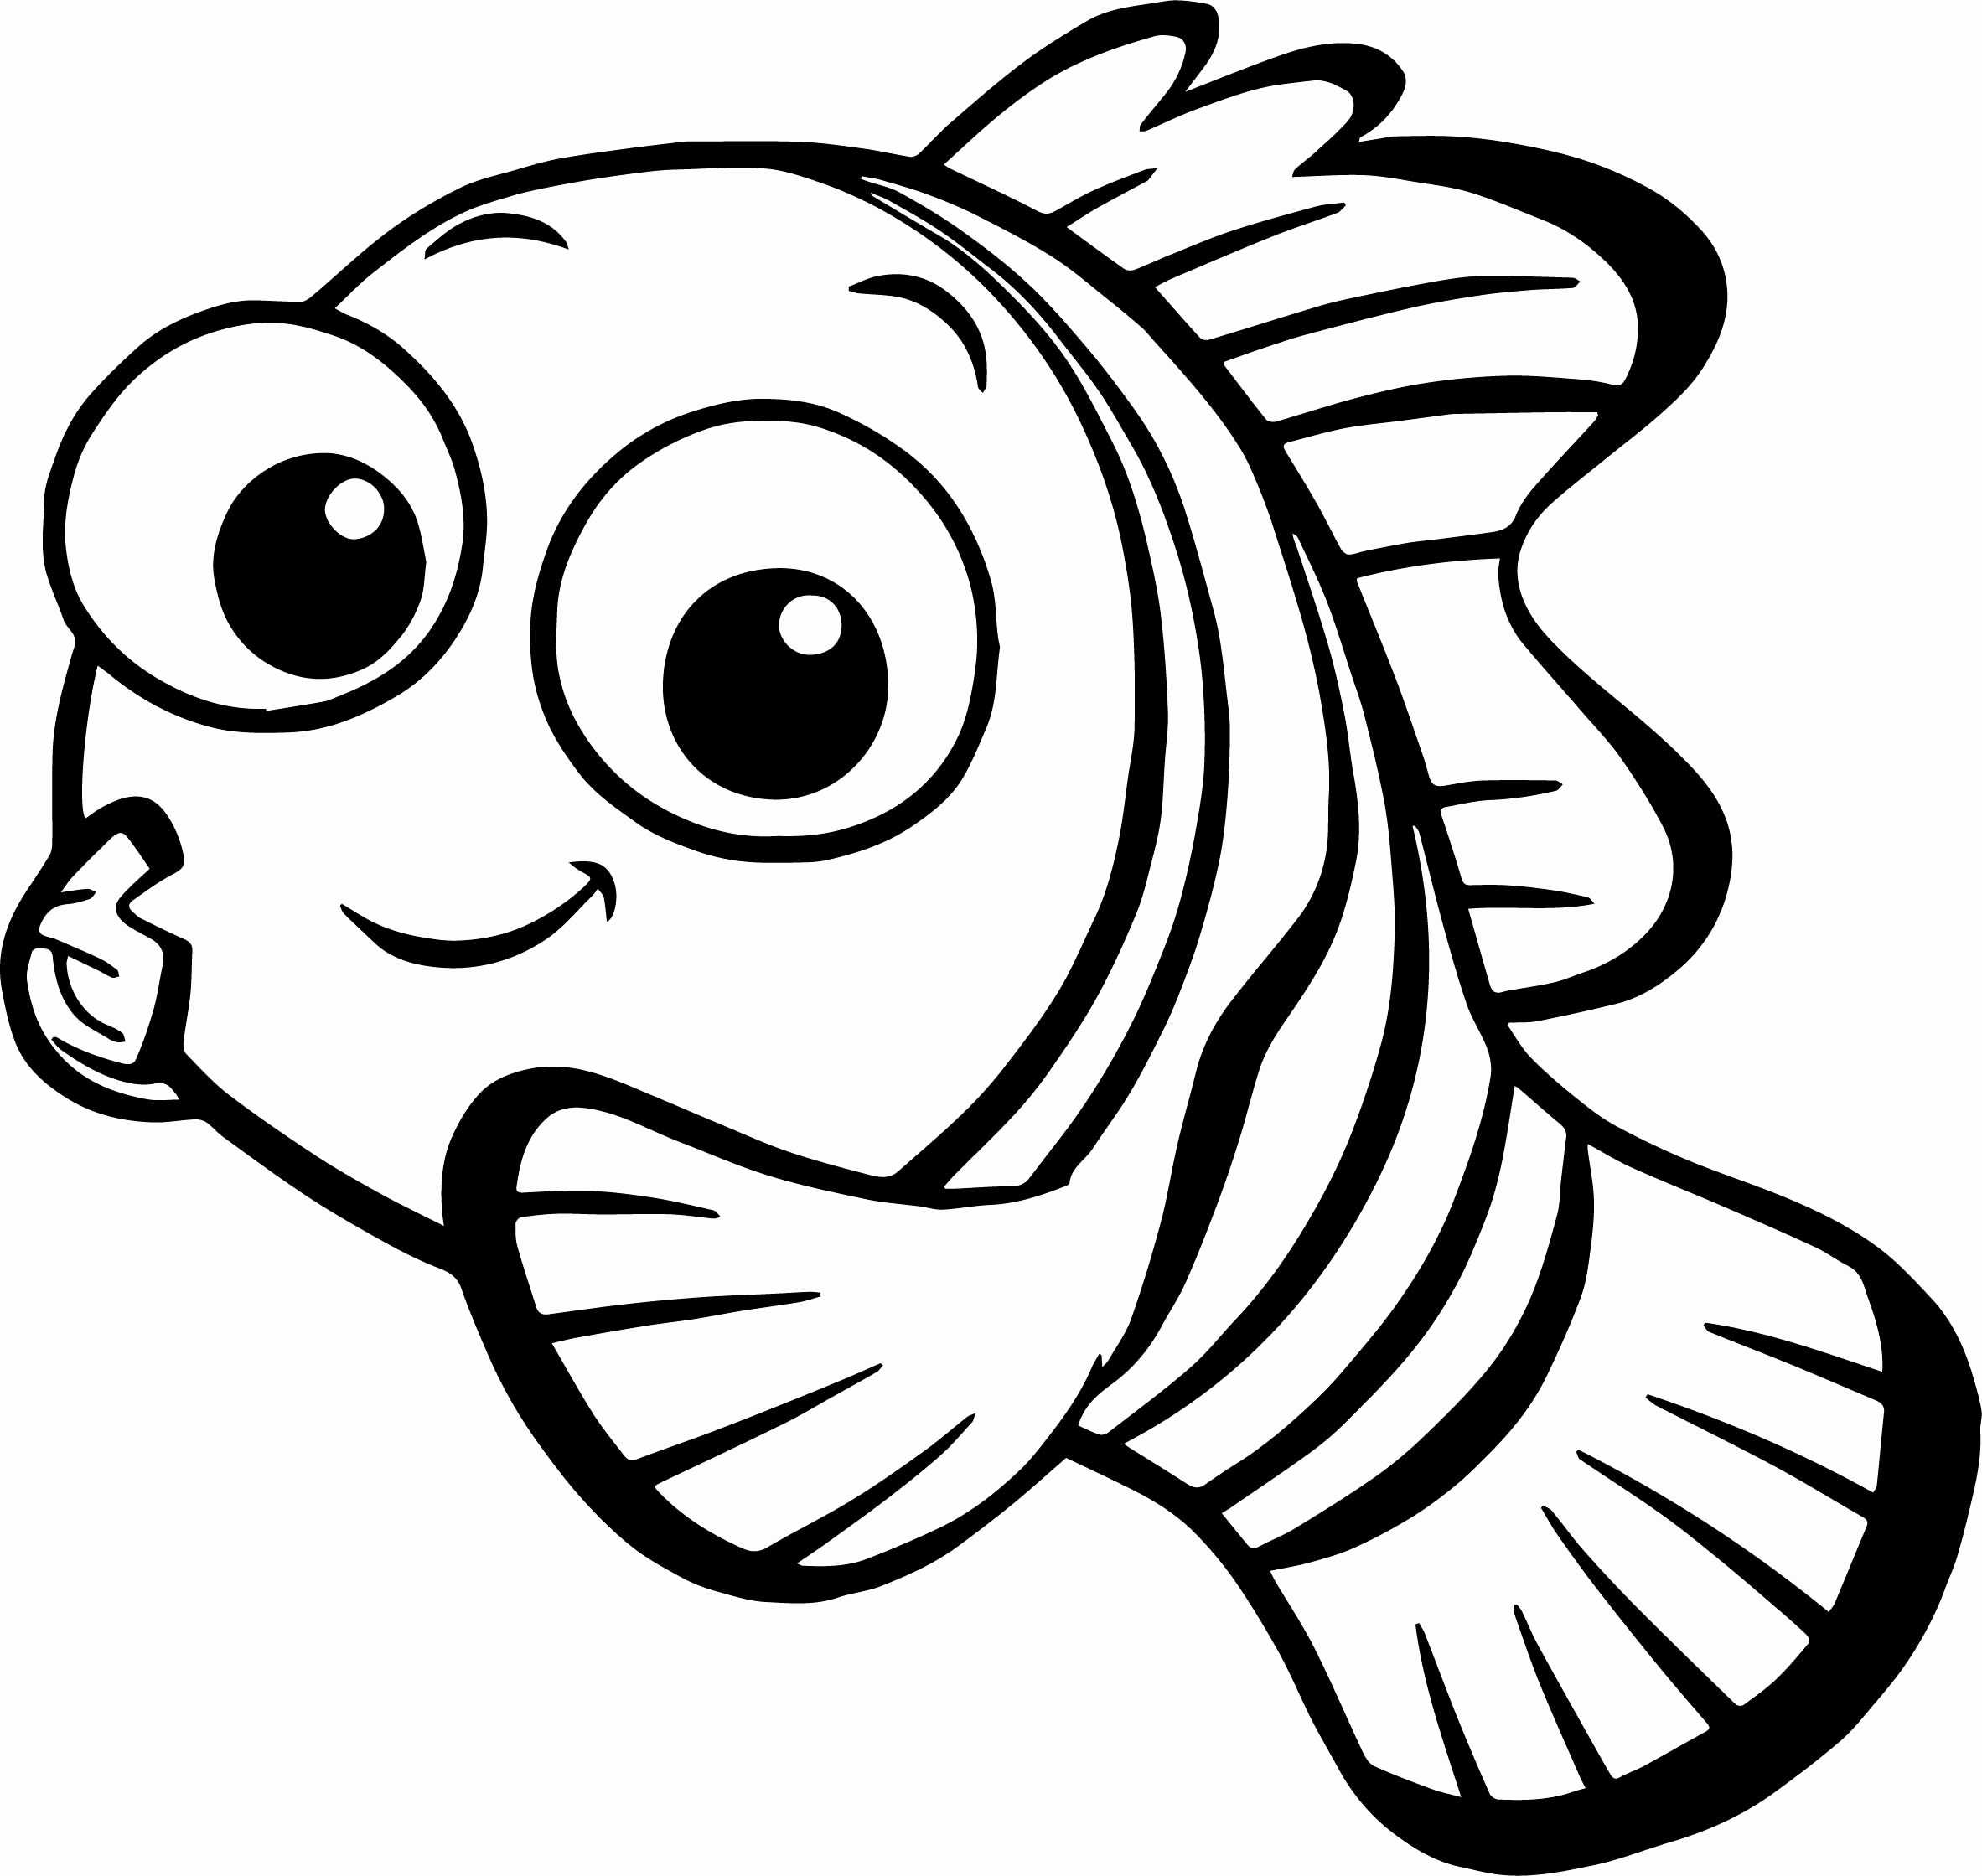 Finding Nemo Worksheet or Finding Nemo Coloring Page Free Coloring Pages Download